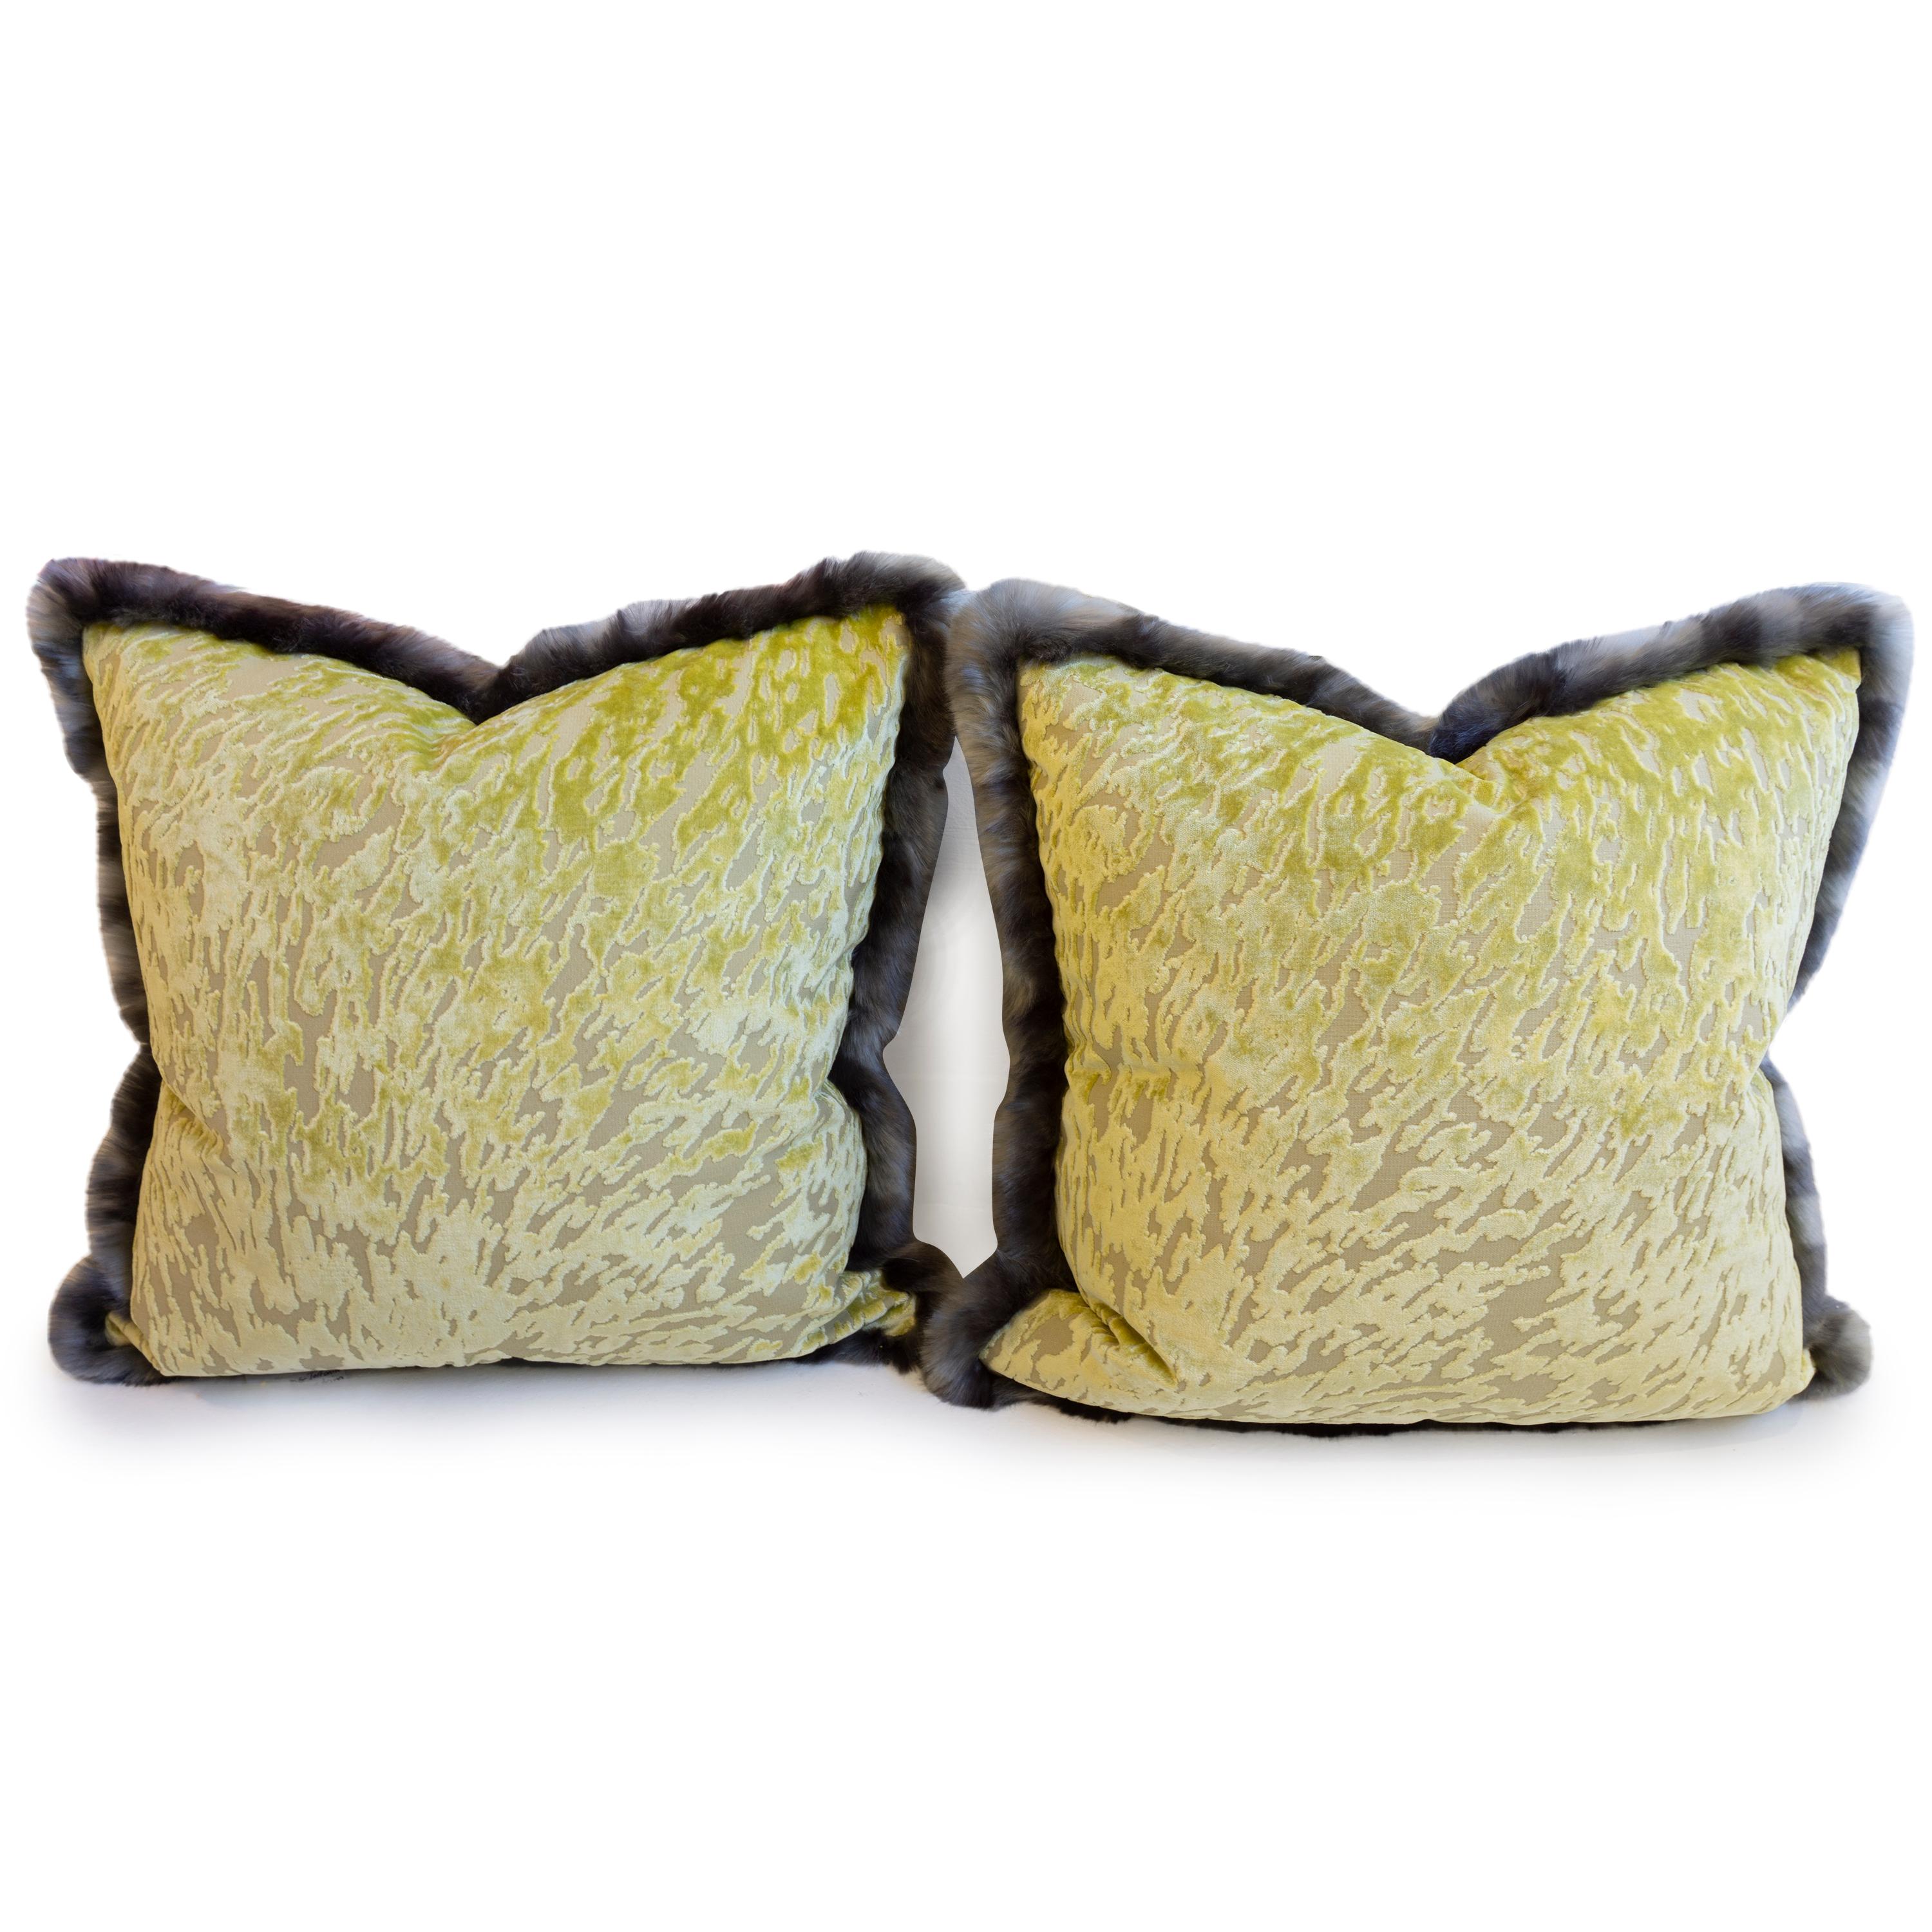 This pair of green cut velvet throw pillows feature a grey faux fur trim and are luxurious to touch. The pillows create an eccentric accent to the room. All pillows are hand sewn at our studio in Norwalk, Connecticut. 

Measurements: 21